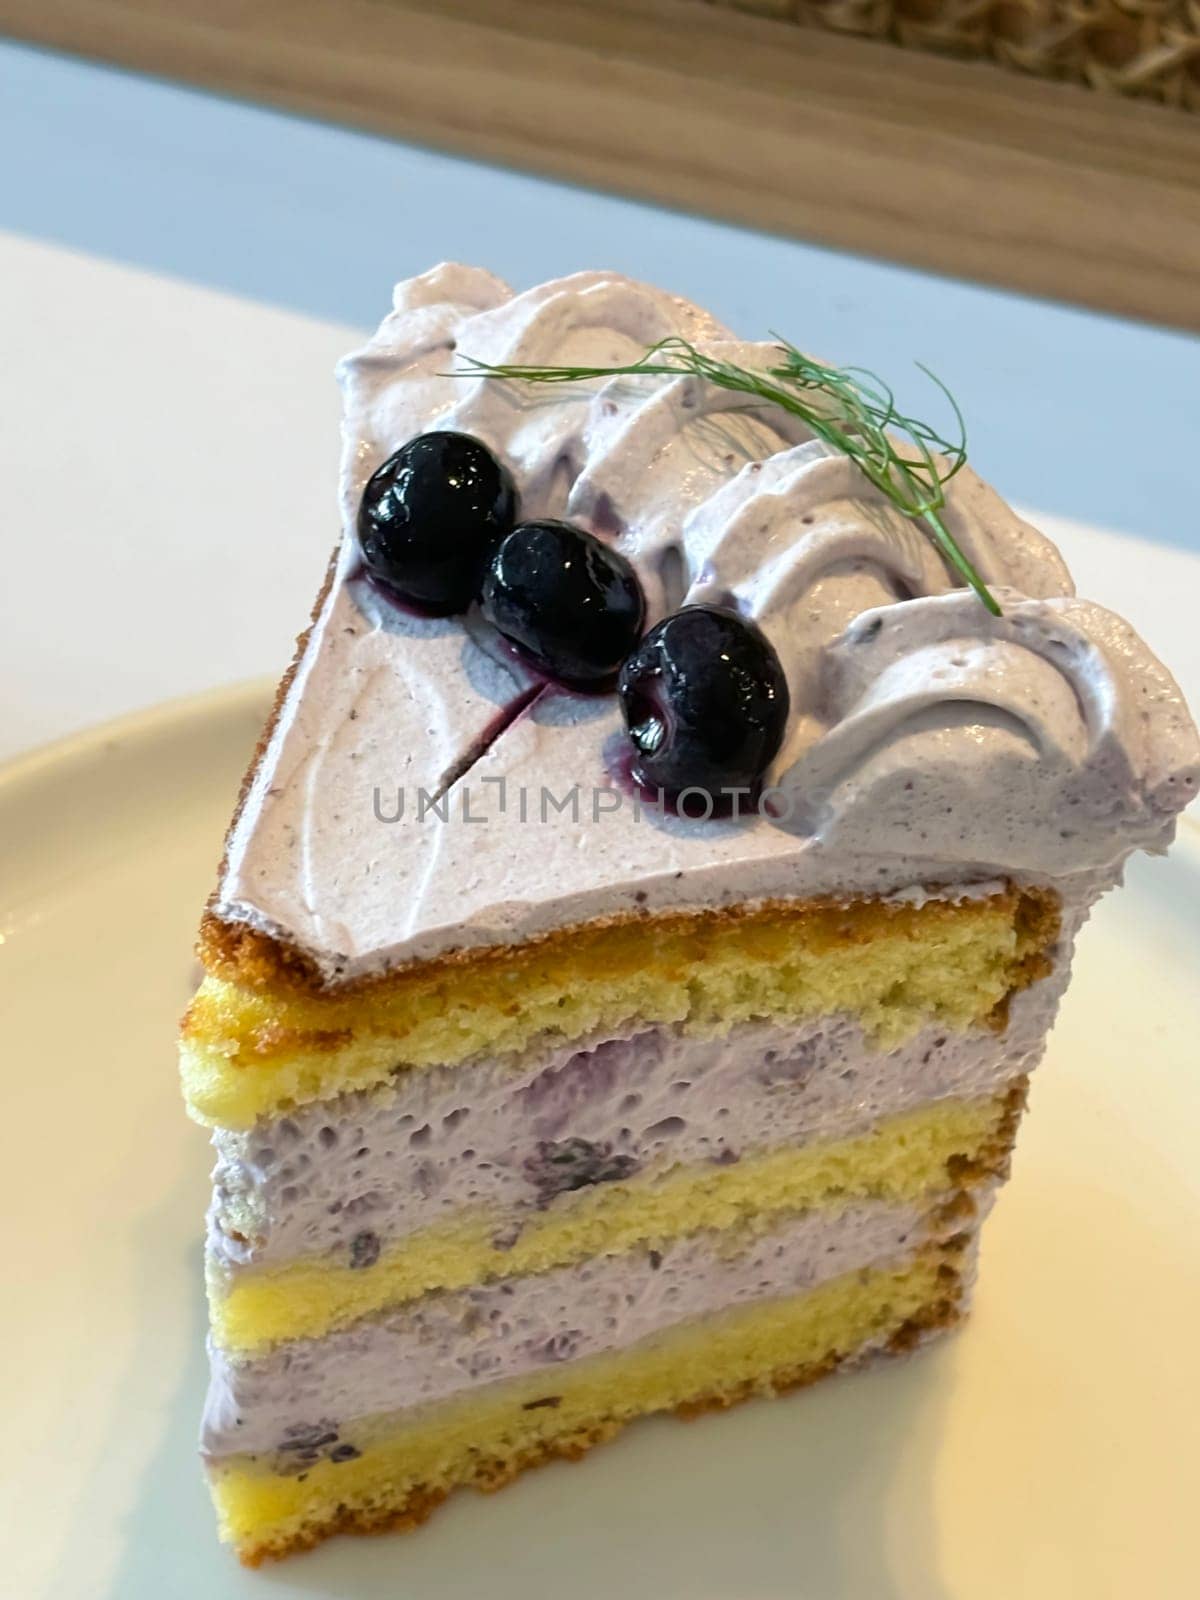 slice of blueberry cake decorated with fresh berries on white plate, delicious layered cake, top view in the cafe